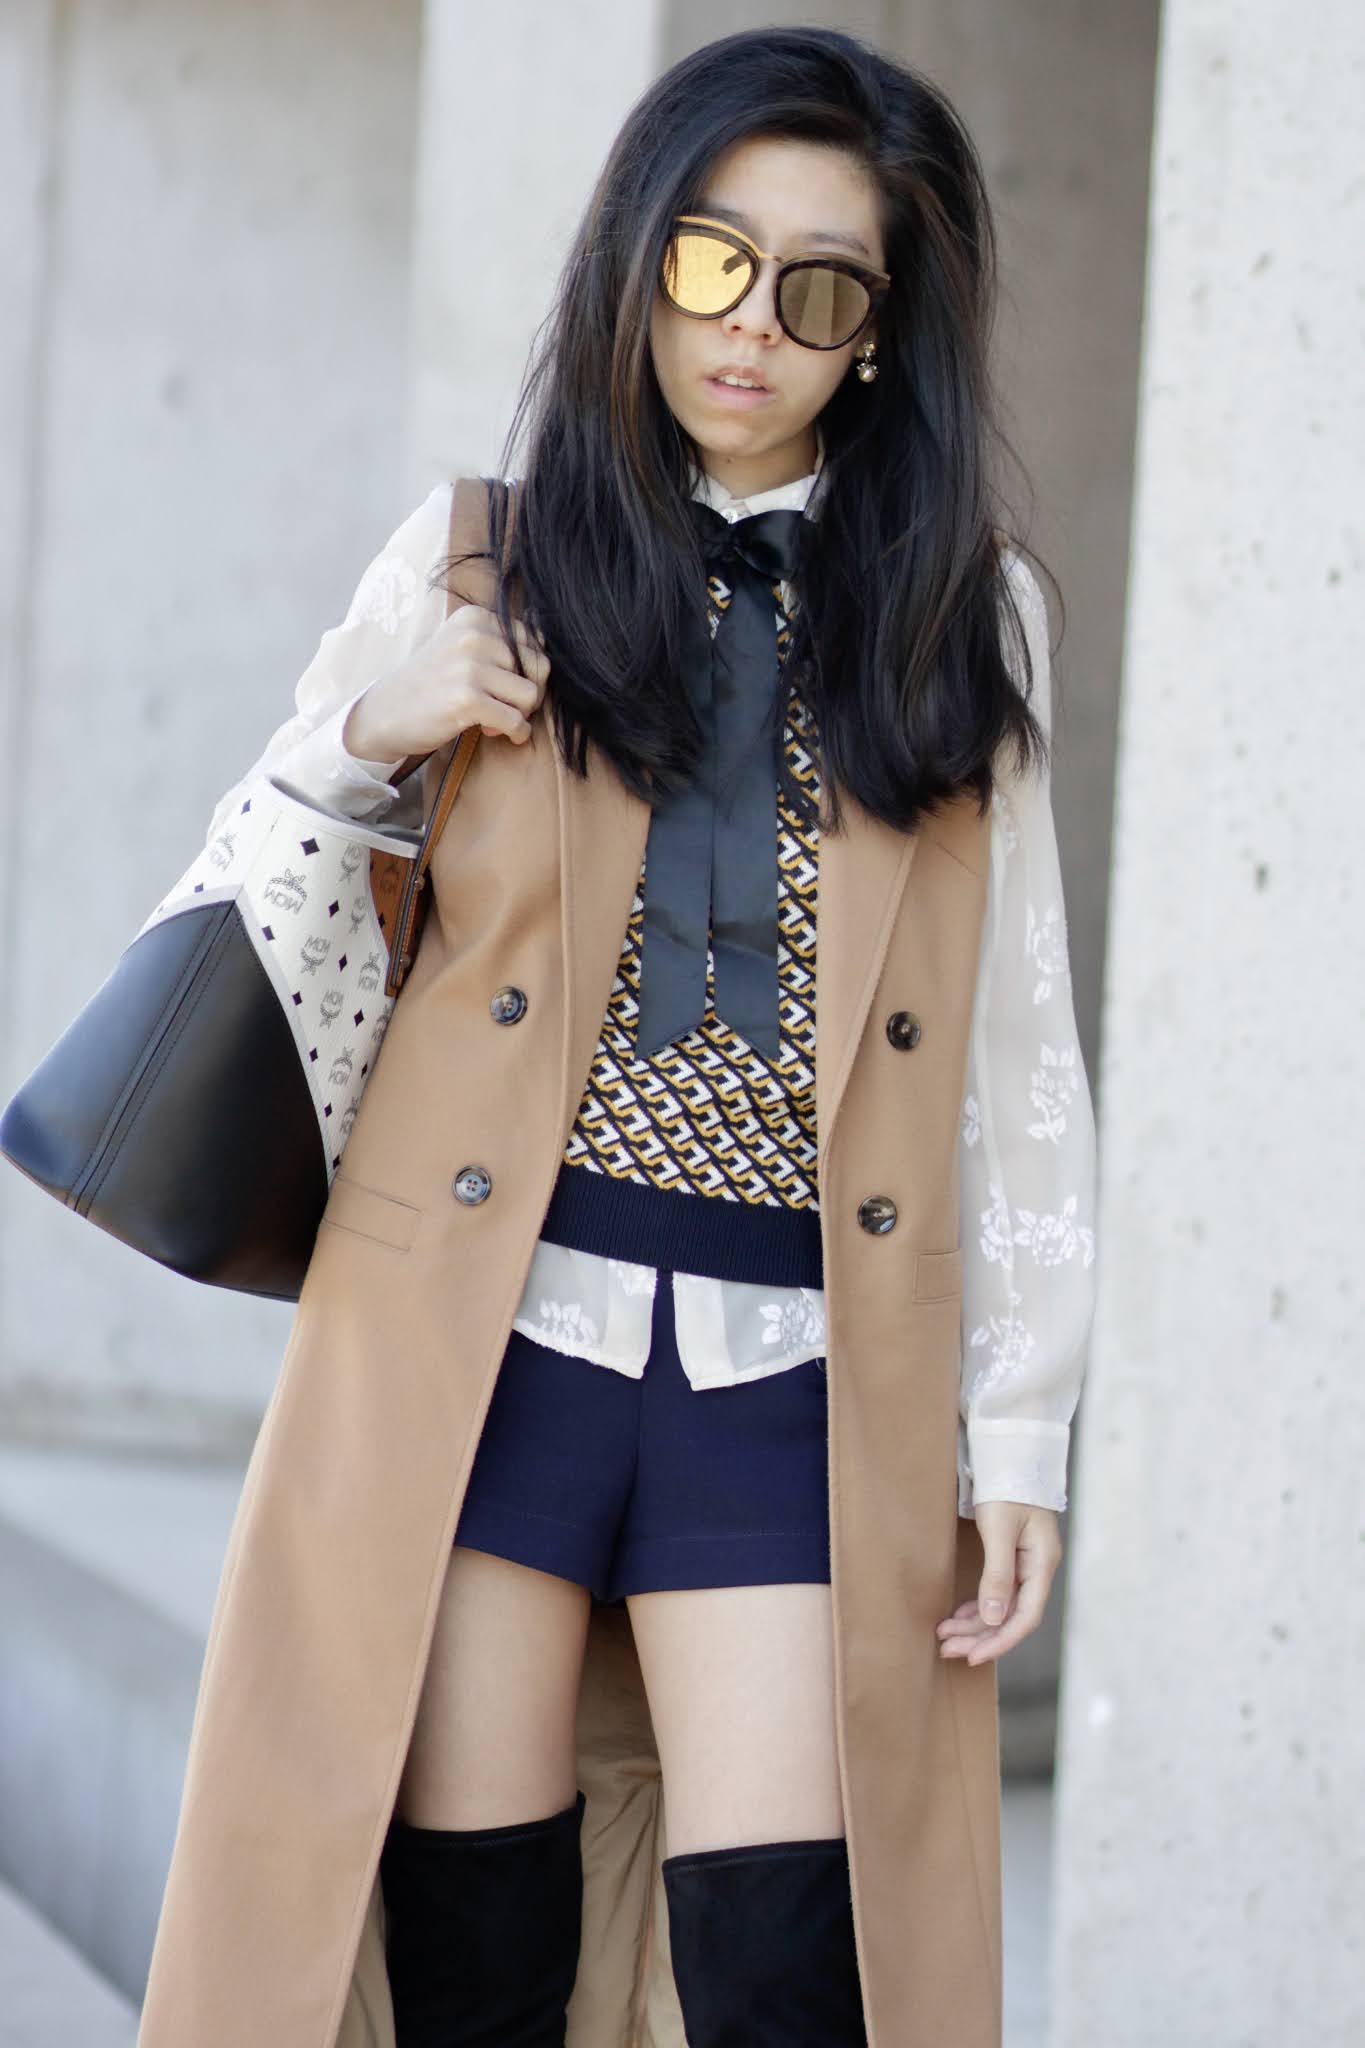 Sweater Vest with Bow Collar Button Down and Duster Coat OTK Boots Outfit_Gossip Girl Inspired Fashion in 2021_What to Wear in Spring_Adrienne nguyen